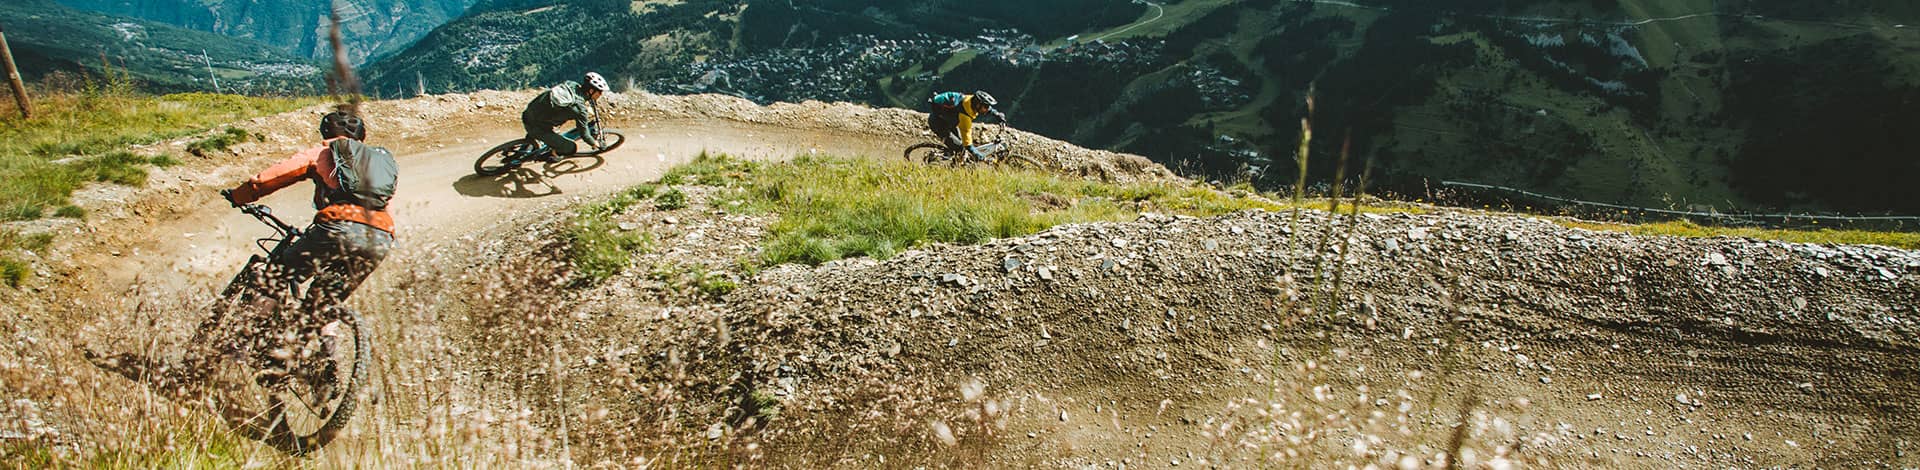 Ride a whole day in Les 3 Vallées thanks to the 7-day mountain bike pass